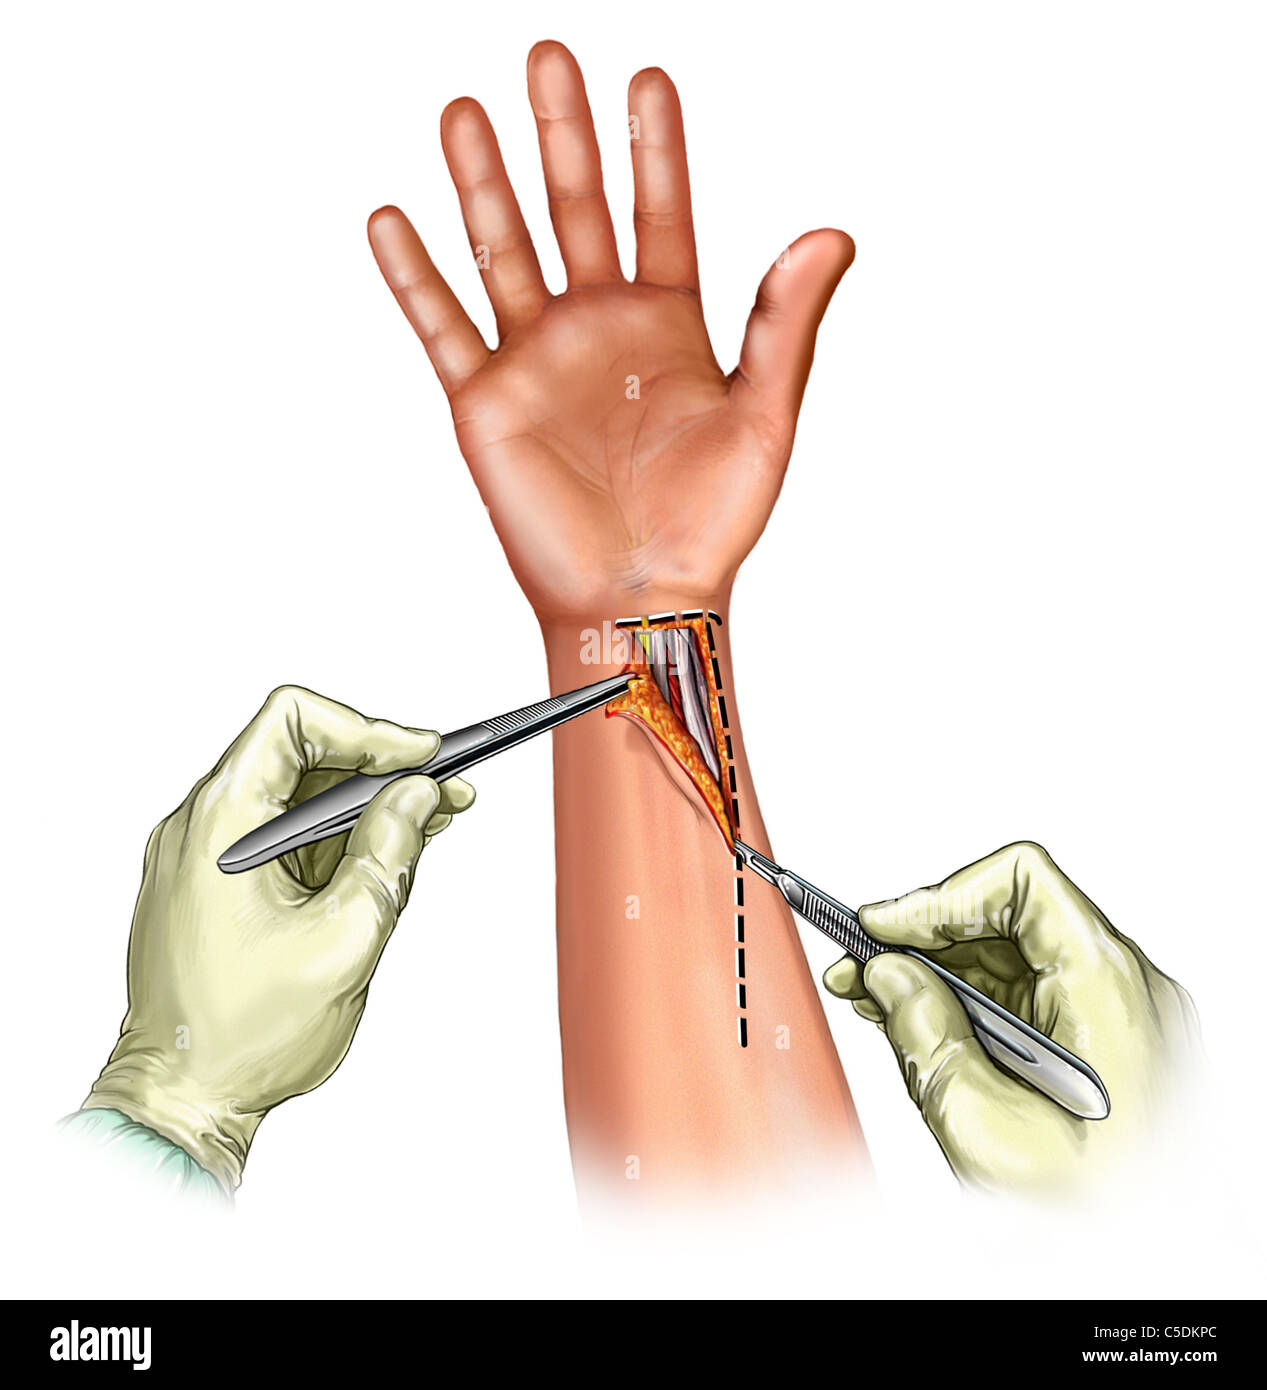 Henry's approach incision to expose the distal radius for internal fracture fixation using a volar plate Stock Photo